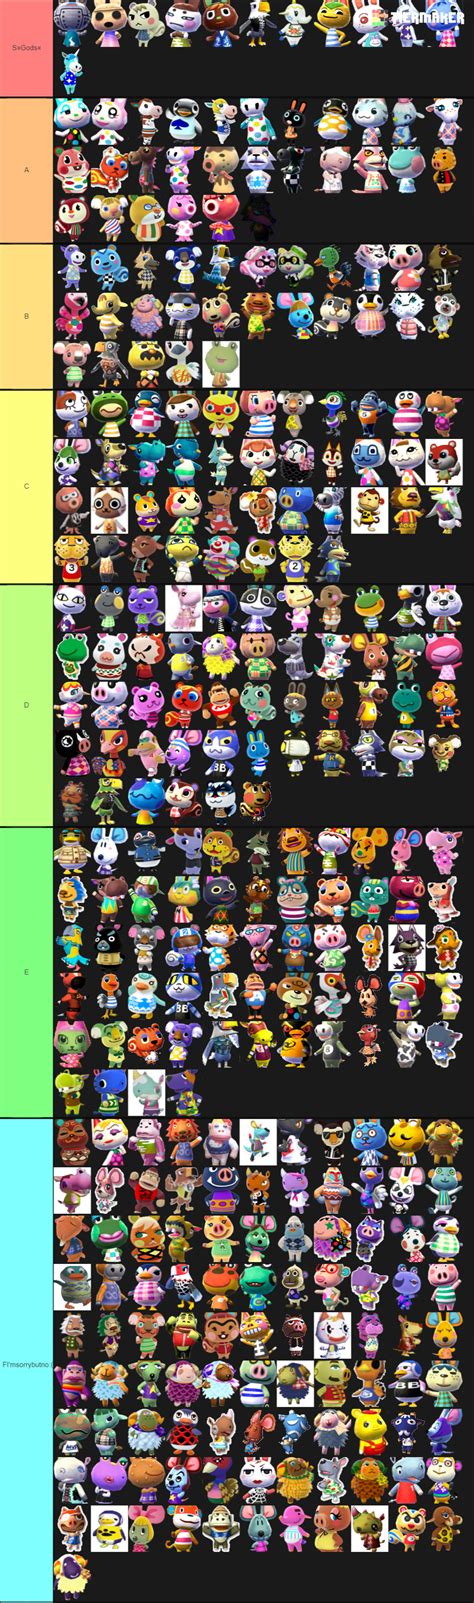 Animal crossing new horizons villager tier list. Looking for the top Greenwich Village brunch places? Look no further! Click this now to discover the BEST brunch in Greenwich Village, NY - AND GET FR Greenwich Village is a charmi... 